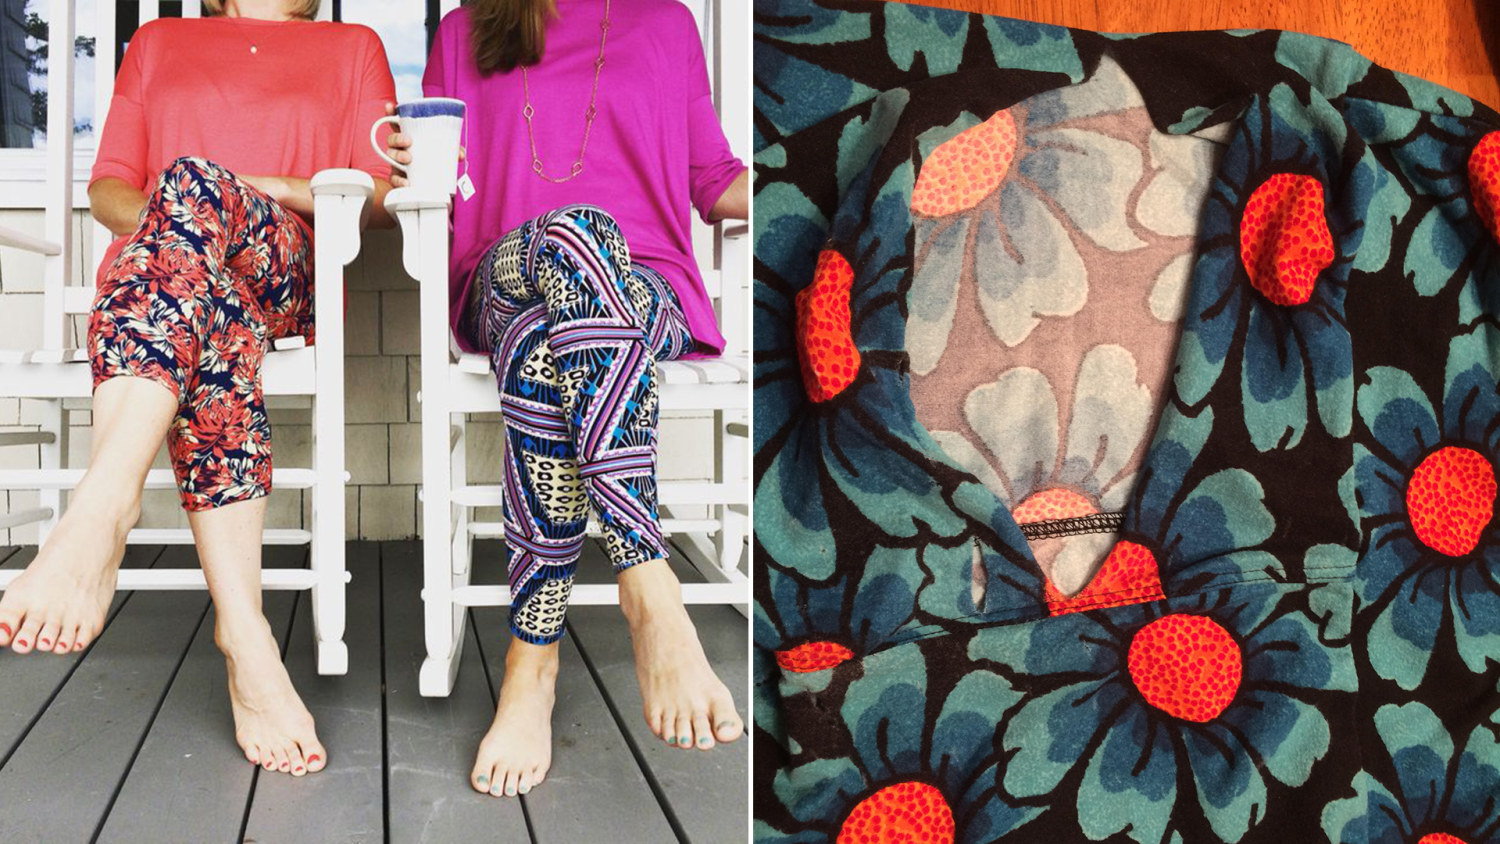 How to Get a Refund for LuLaRoe's Defective Leggings